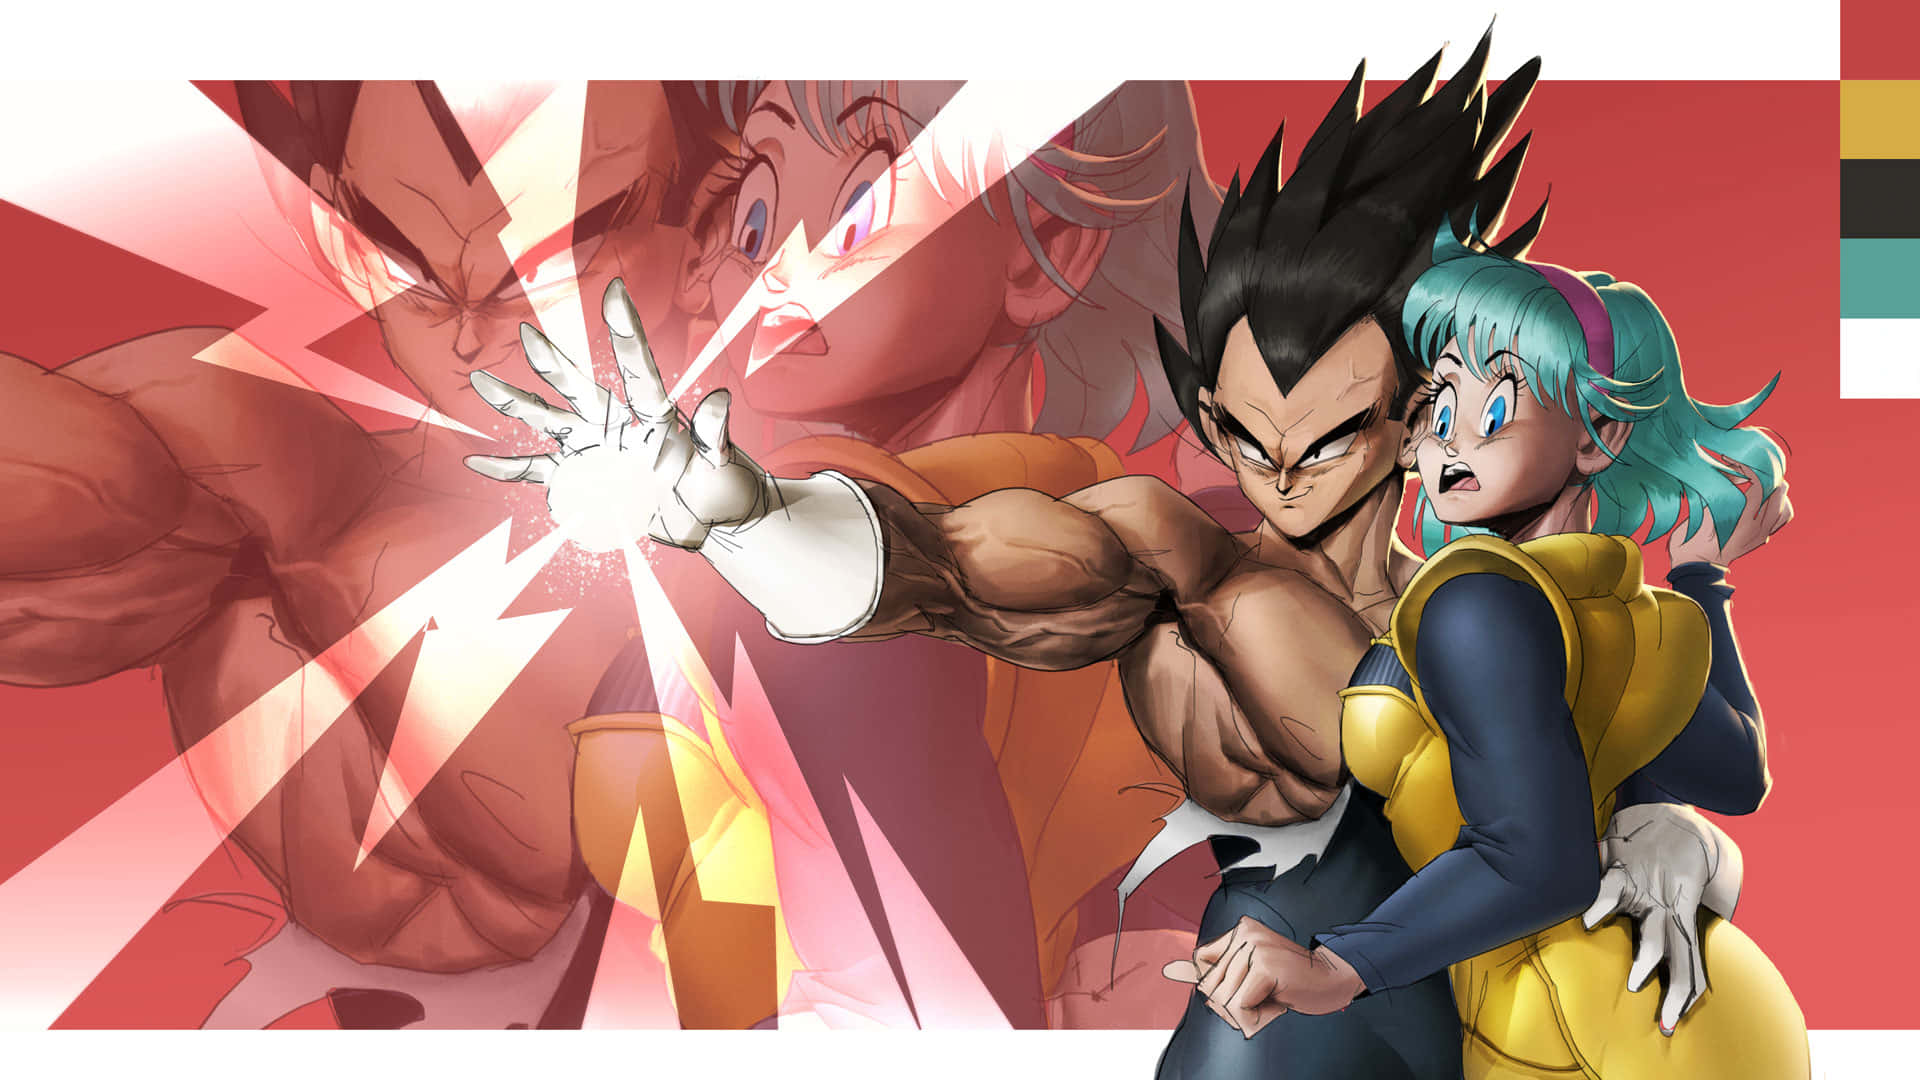 Vegeta and Bulma, two of the Dragon Ball Z protagonists, together Wallpaper